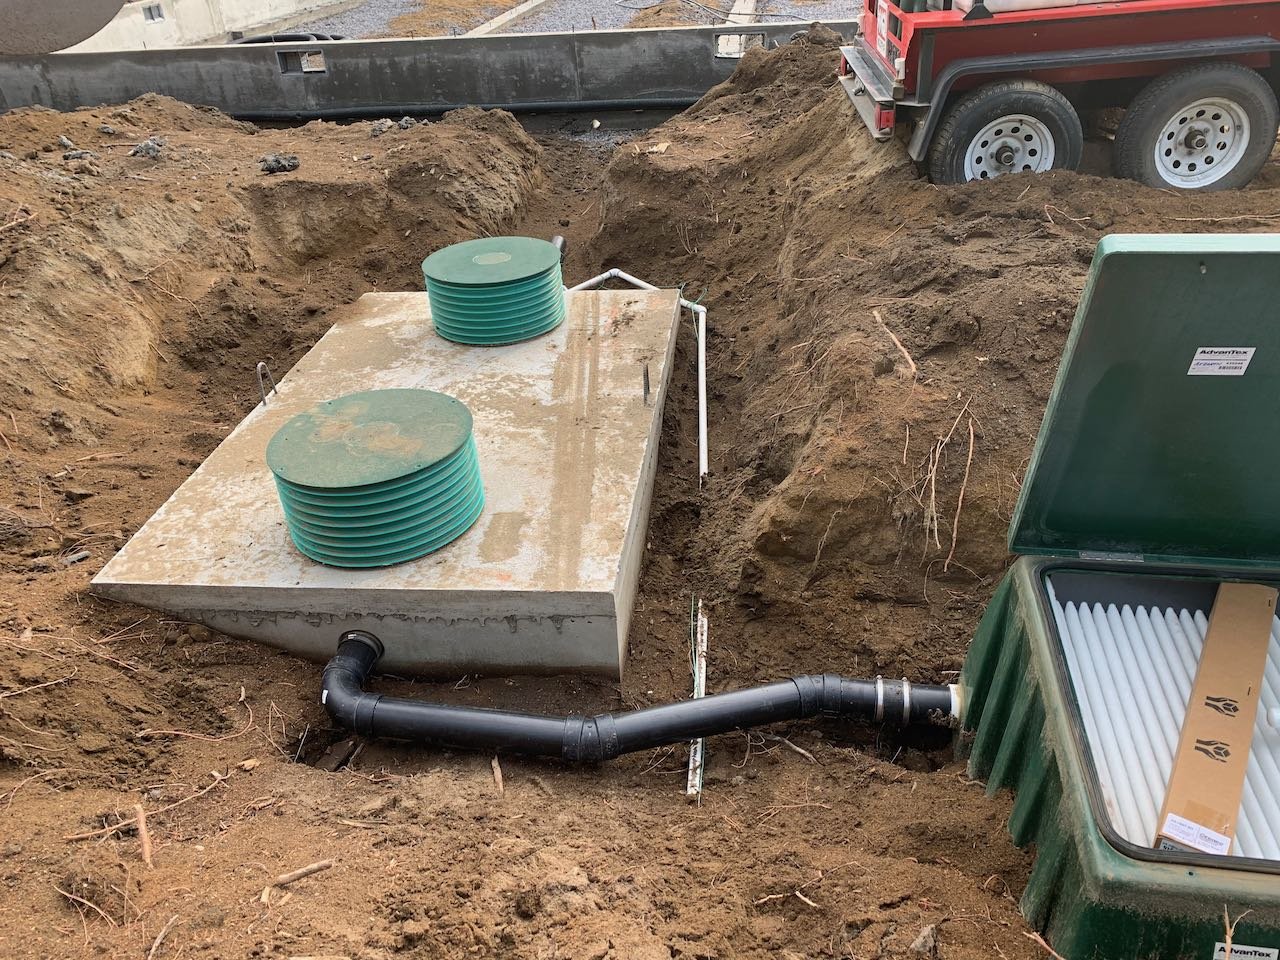 Advanced Treatment Technology Unit connected to concrete septic tank